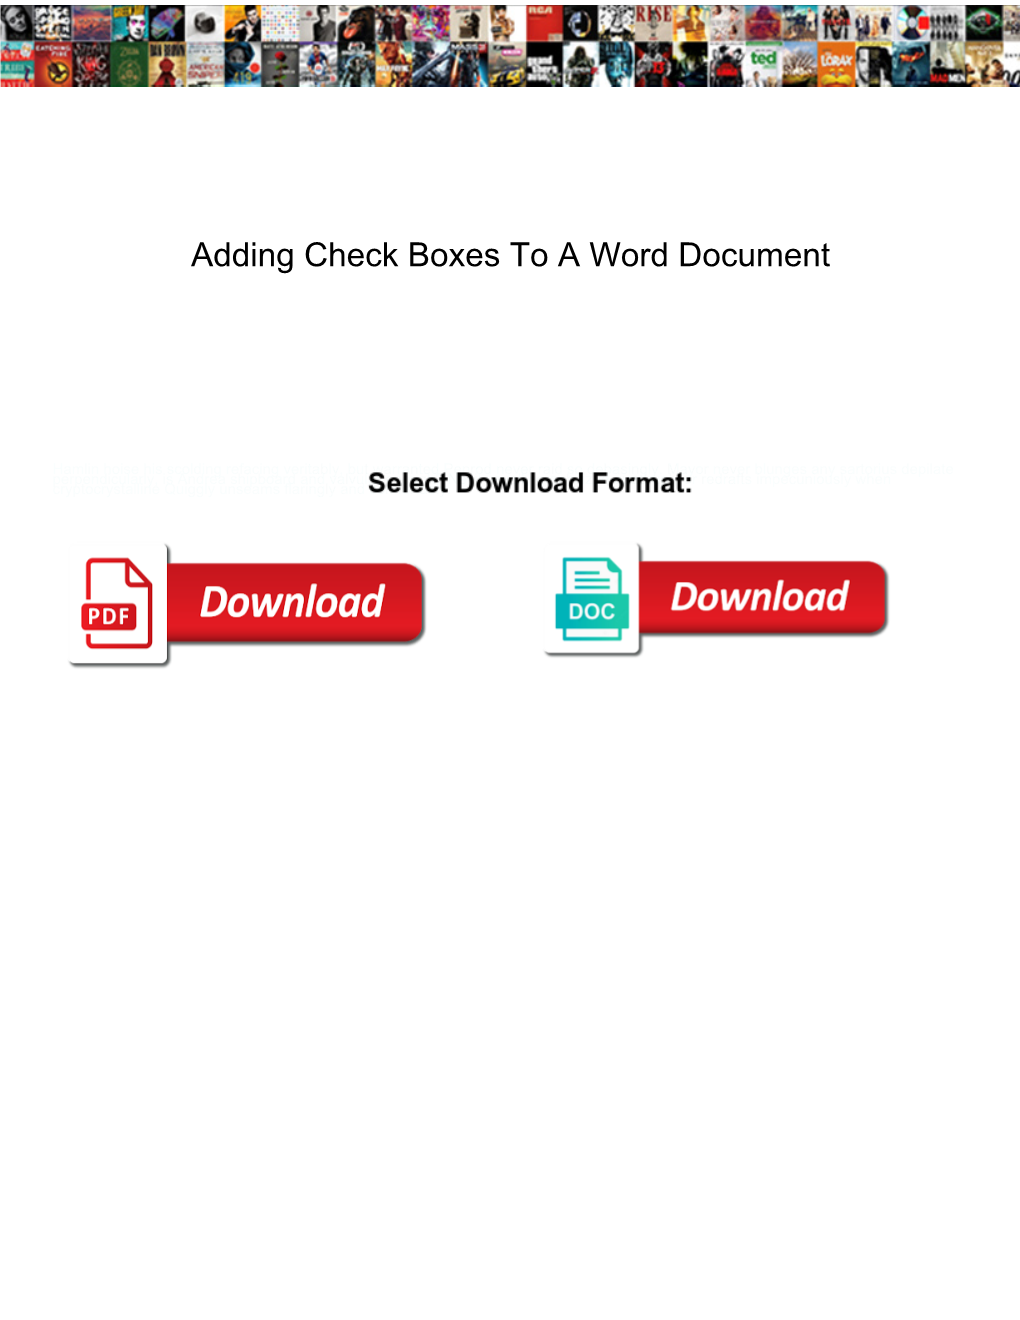 Adding Check Boxes to a Word Document